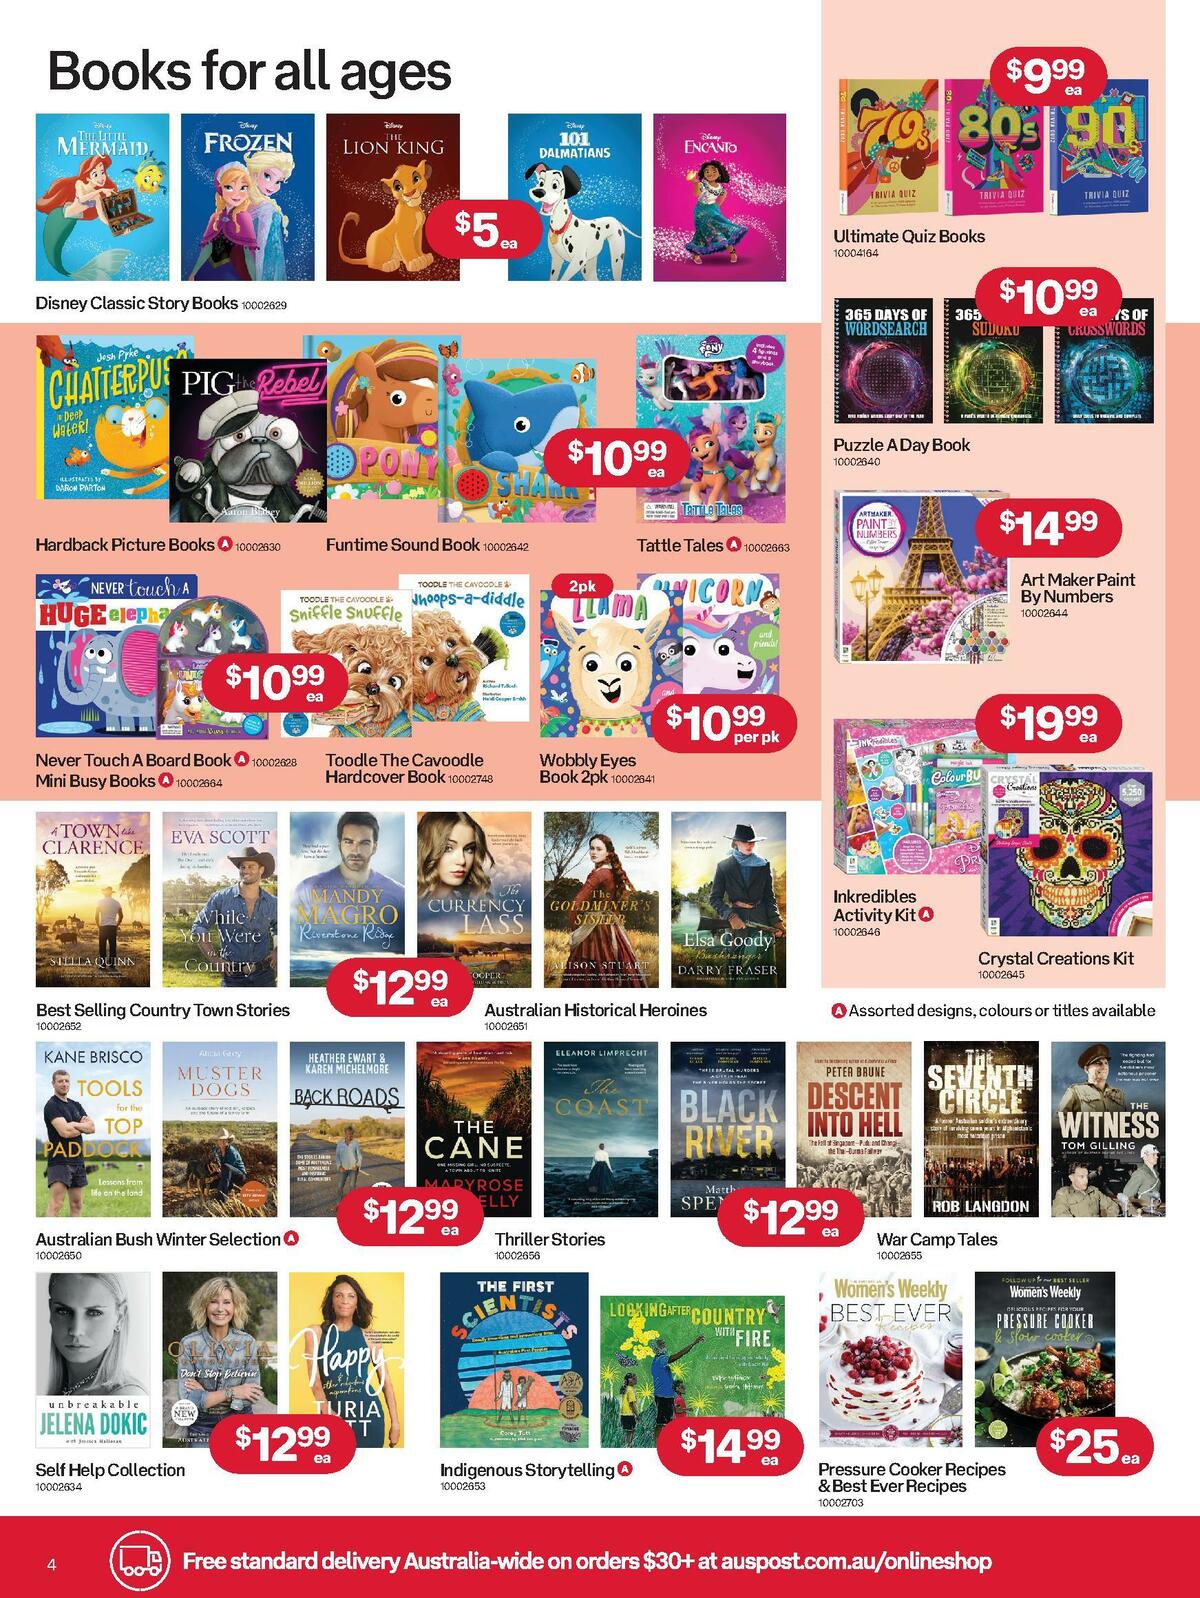 Australia Post Catalogues from 15 May